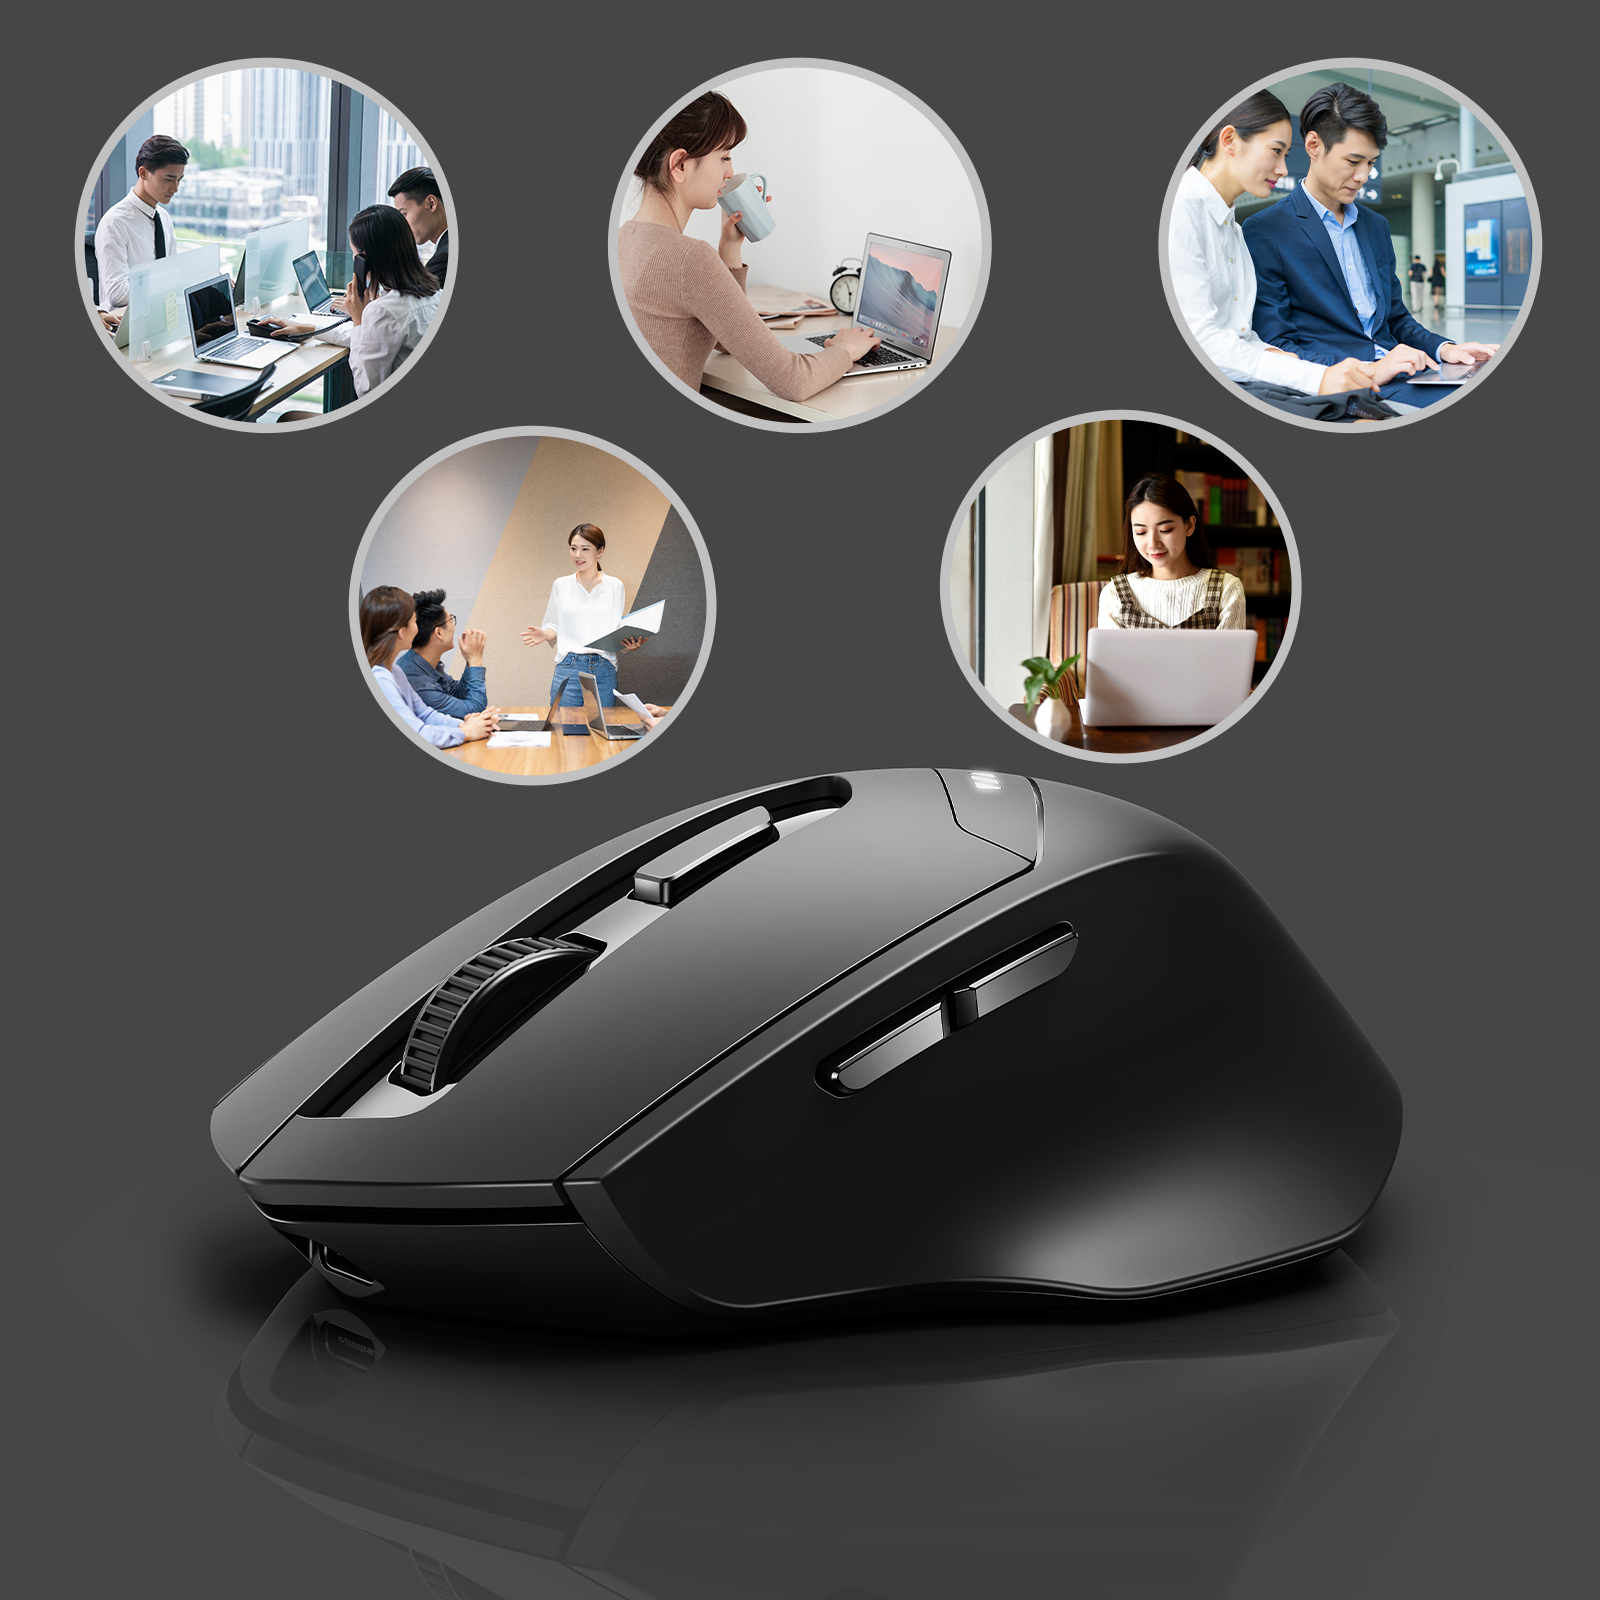 Bluetooth Mouse Rechargeable, Inphic 2.4G Wireless Mouse Silent, 3 Modes (Bluetooth 5.0/4.0+USB) Multi-Device Connection, Ergonomic Mouse for Laptop Desktop Mac Android Windows, Black